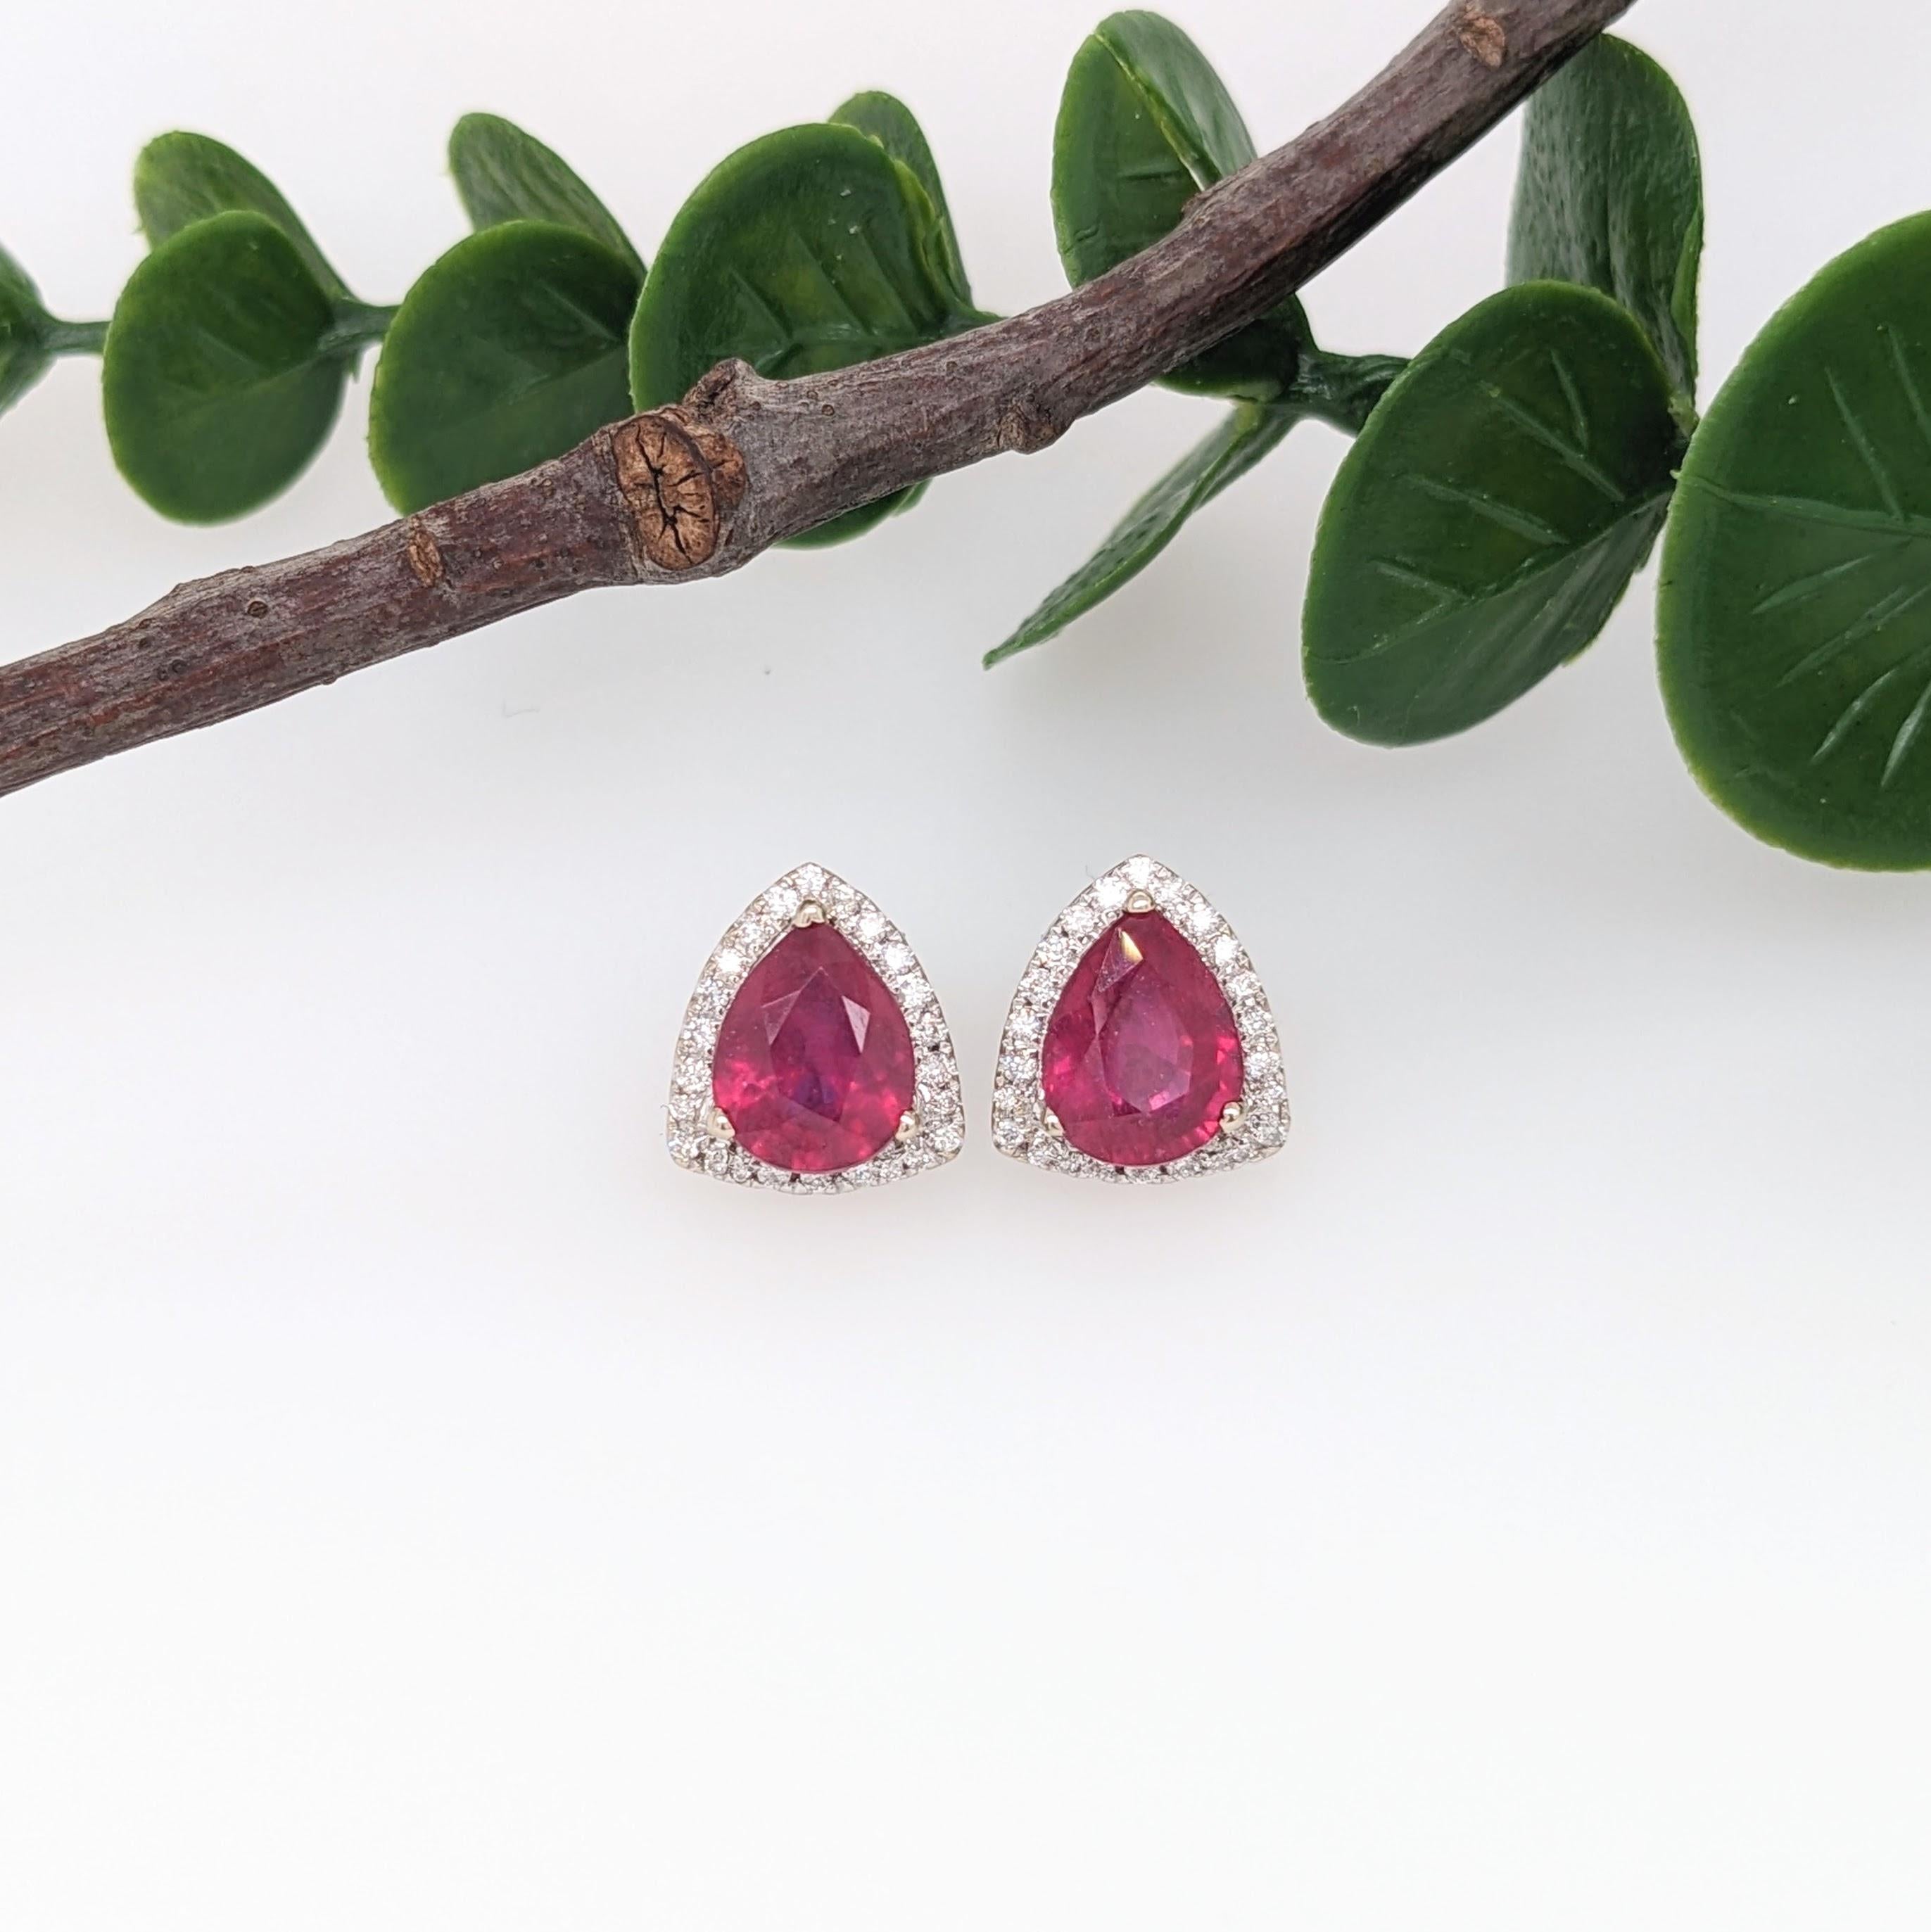 Specifications:

Item Type: Earring Studs

Center Stone Specs:
Type: Ruby
Weight: 4.7cts (2)
Shape: Trilliant
Size: 9x7mm
Treatment: Filled
Hardness: 9
Origin: Madagascar

Gold Purity: 14k/ 3.86 grams
Diamonds S/I GH: 52 diamonds totaling 0.27